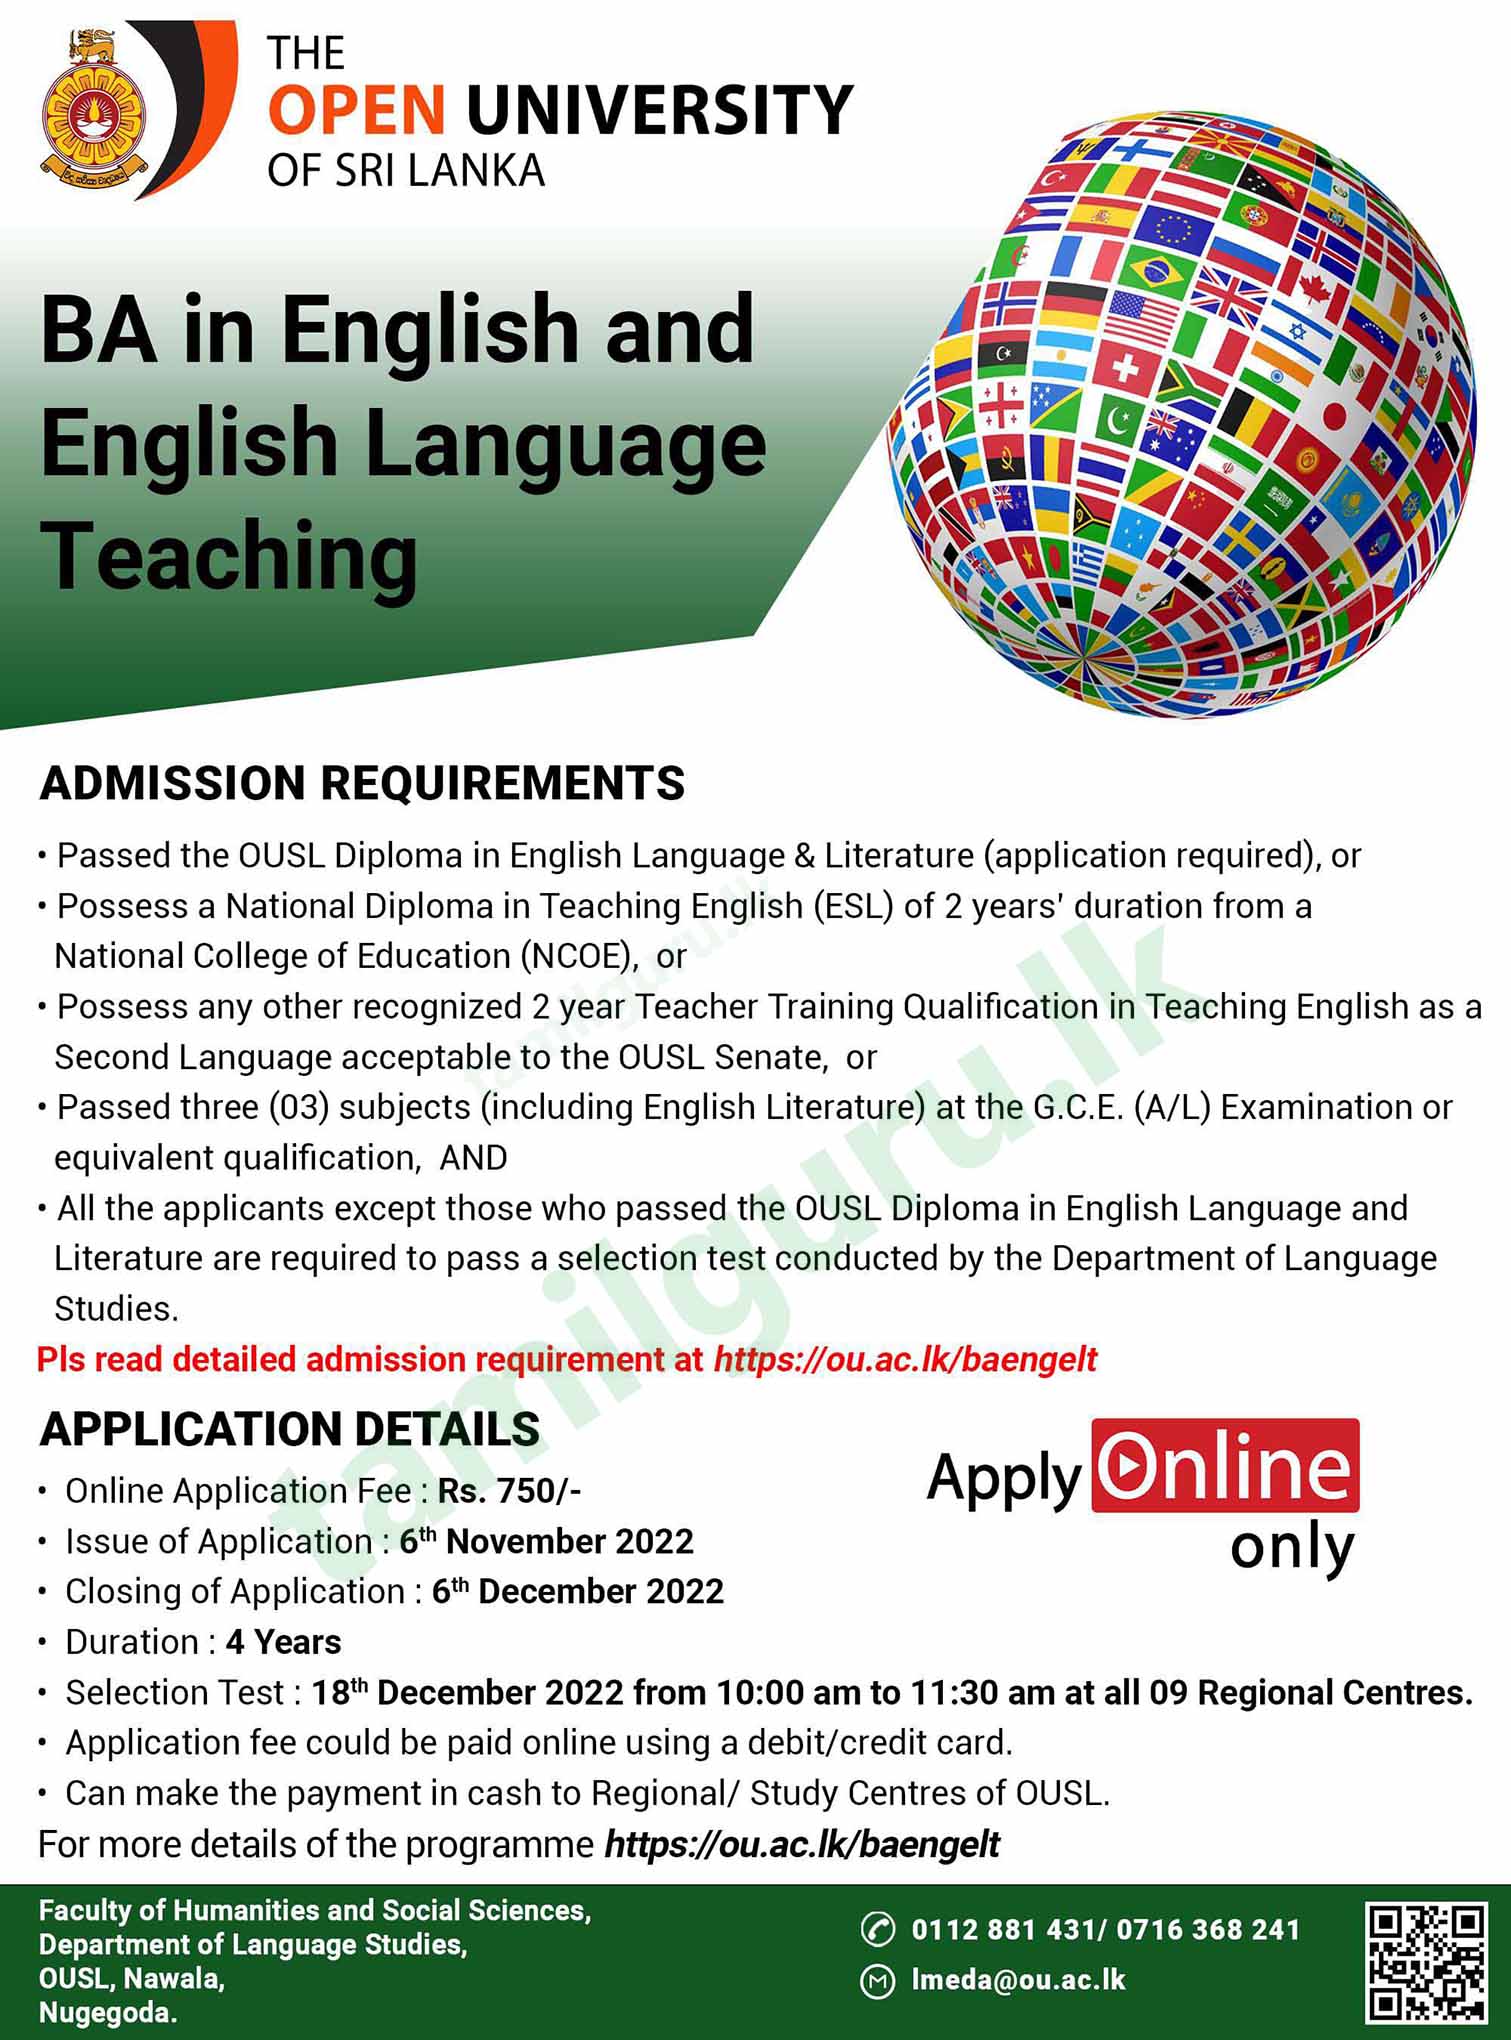 Calling Applications for Bachelor of Arts (BA) in English and English Language Teaching Degree Programme (2022) - Open University of Sri Lanka